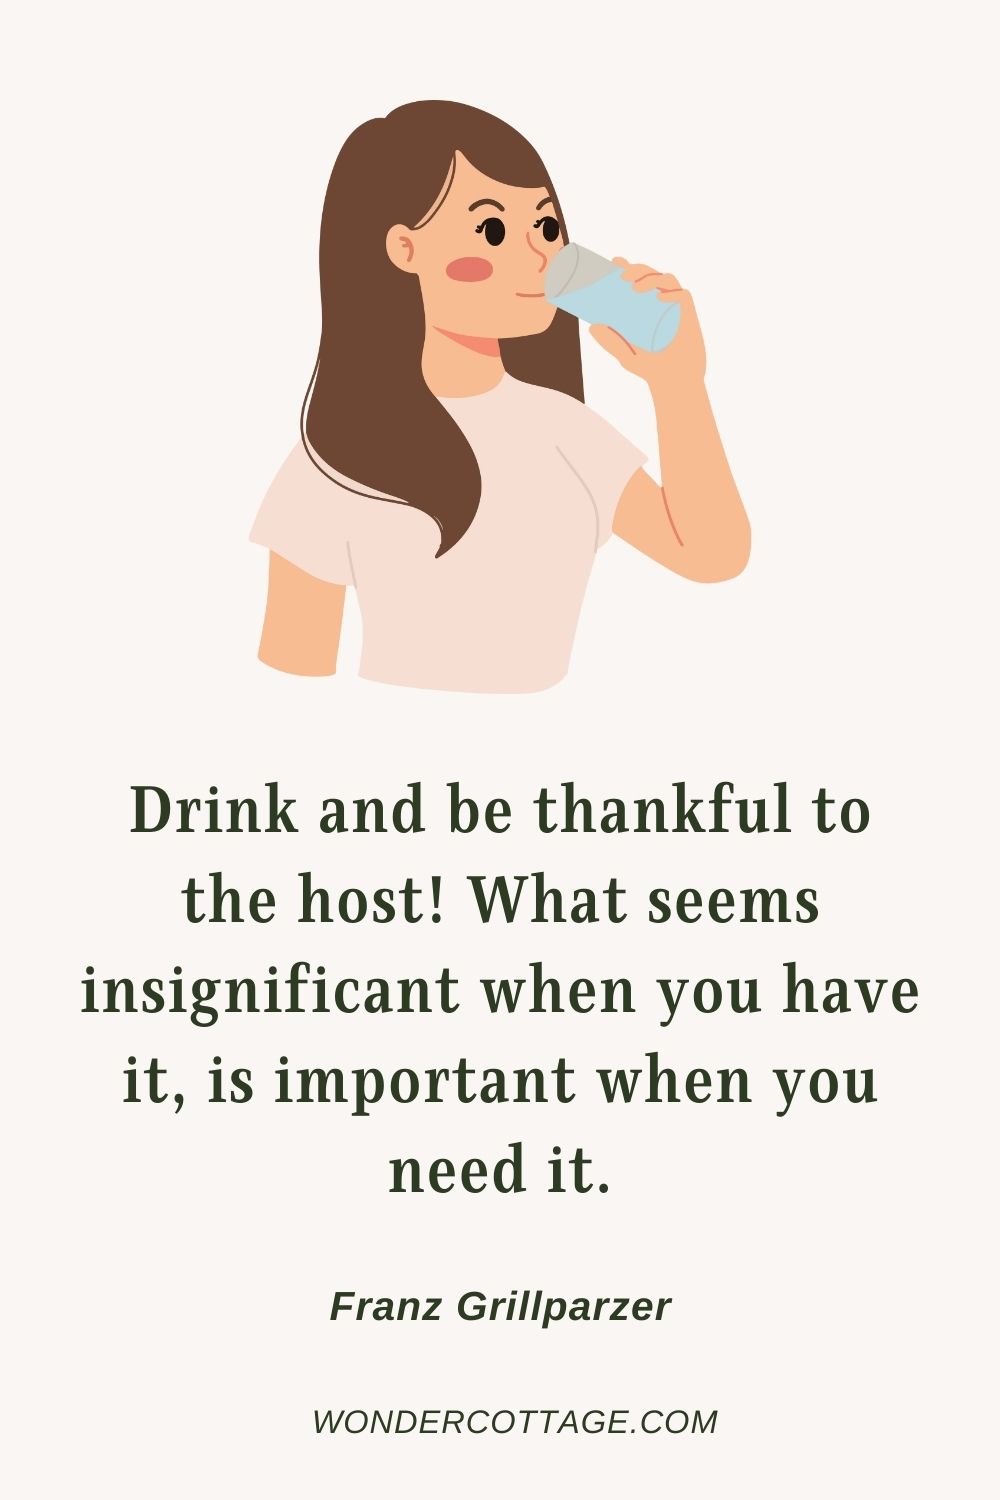 Drink and be thankful to the host! What seems insignificant when you have it, is important when you need it. Franz Grillparzer  - Thanksgiving Quotes With Images